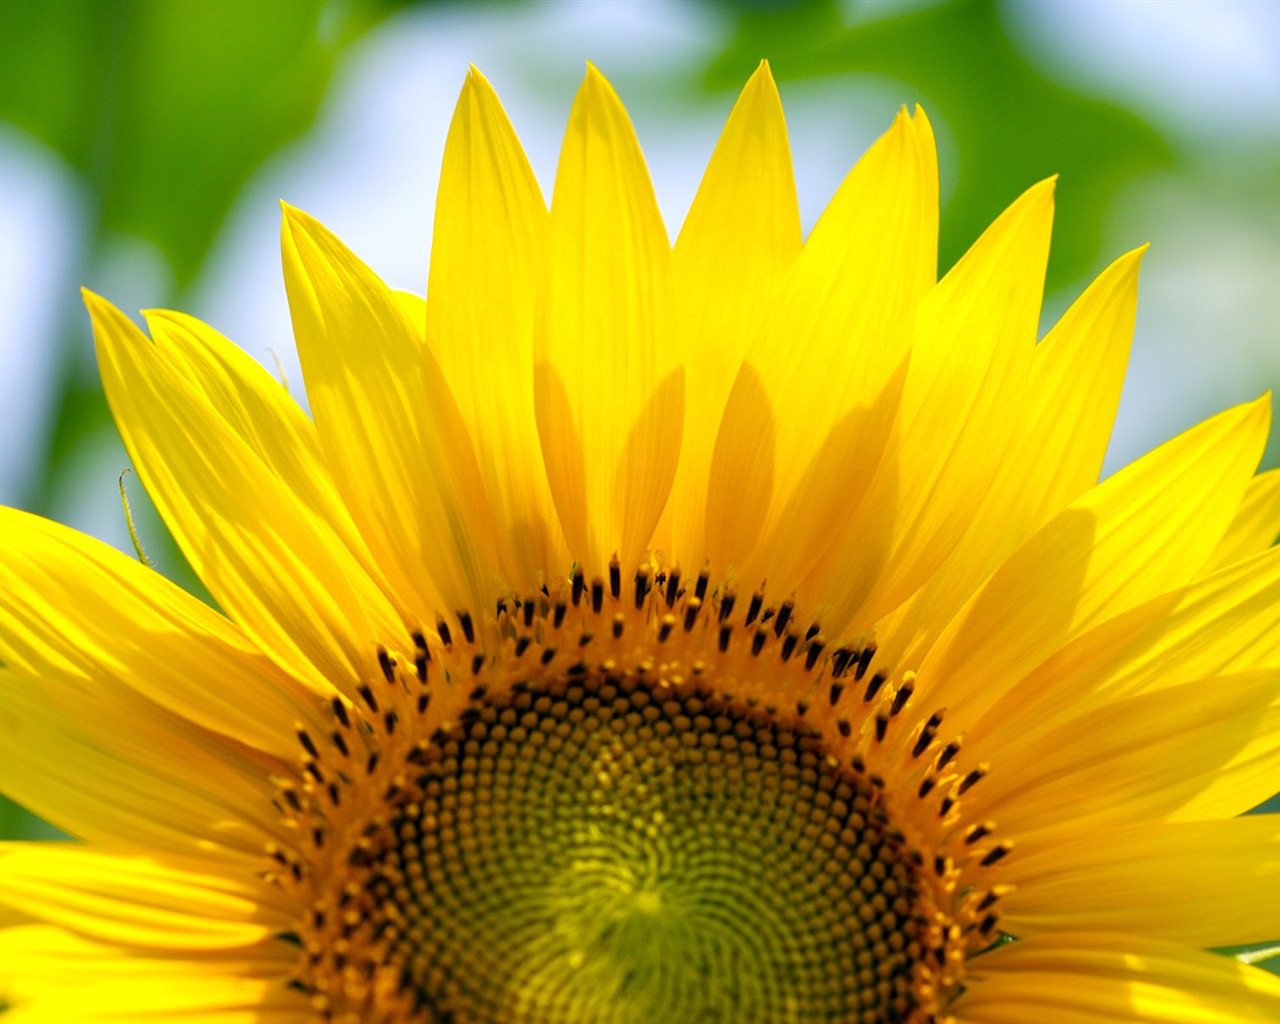 Sunny sunflower photo HD Wallpapers #20 - 1280x1024